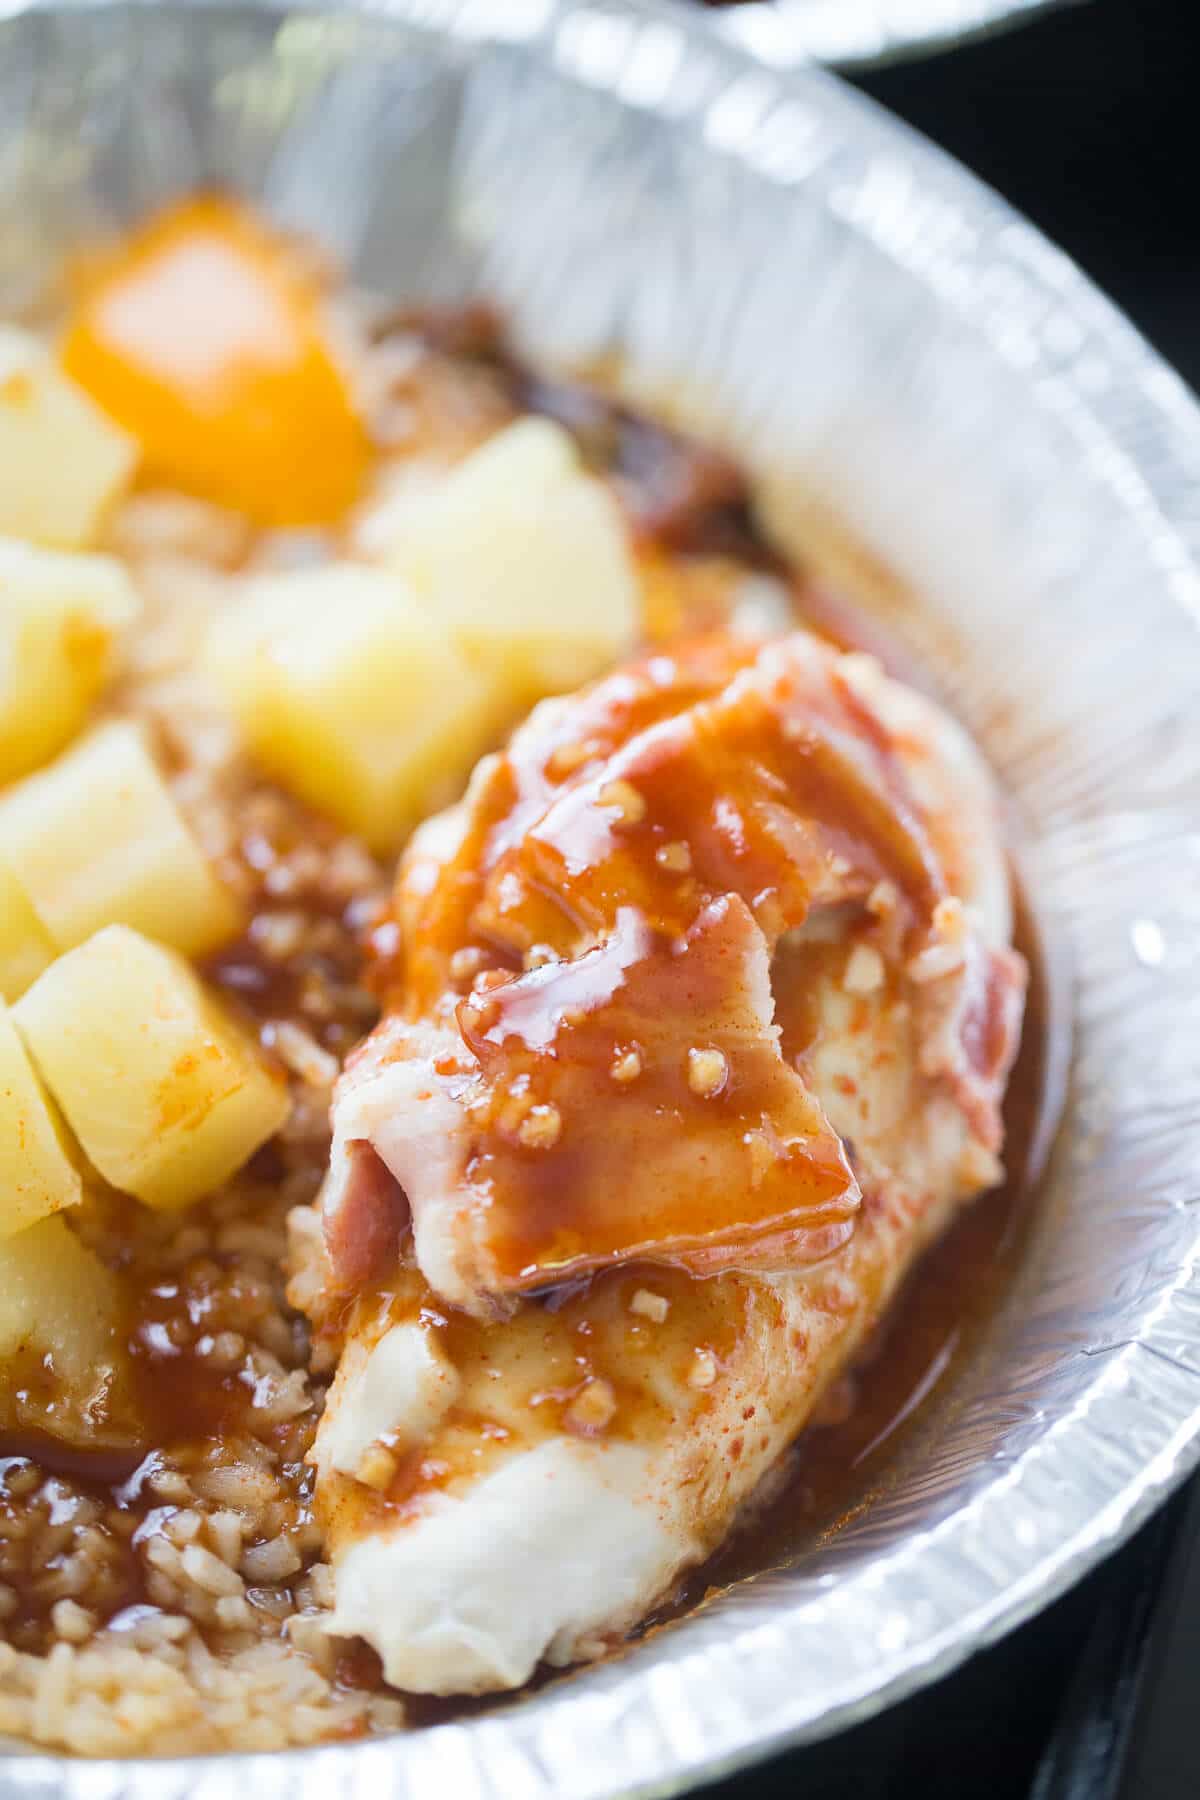 Pineapple chicken is coated in a rich, succulent sauce and cooked right on the grill!